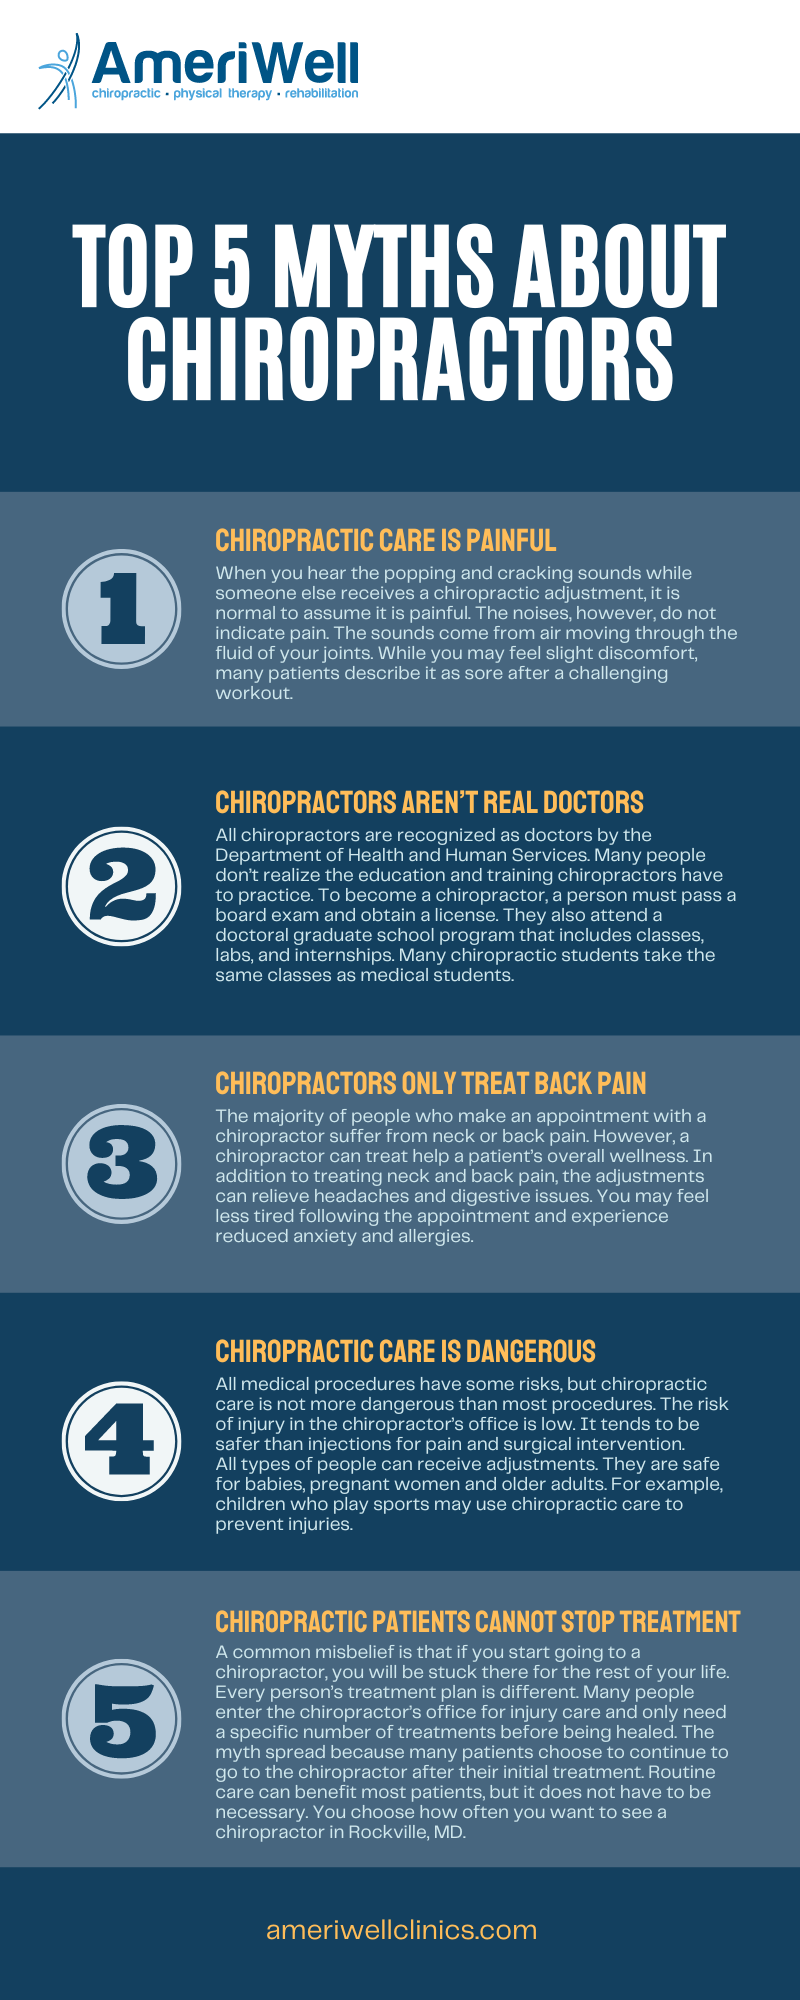 Top 5 Myths About Chiropractors infographic